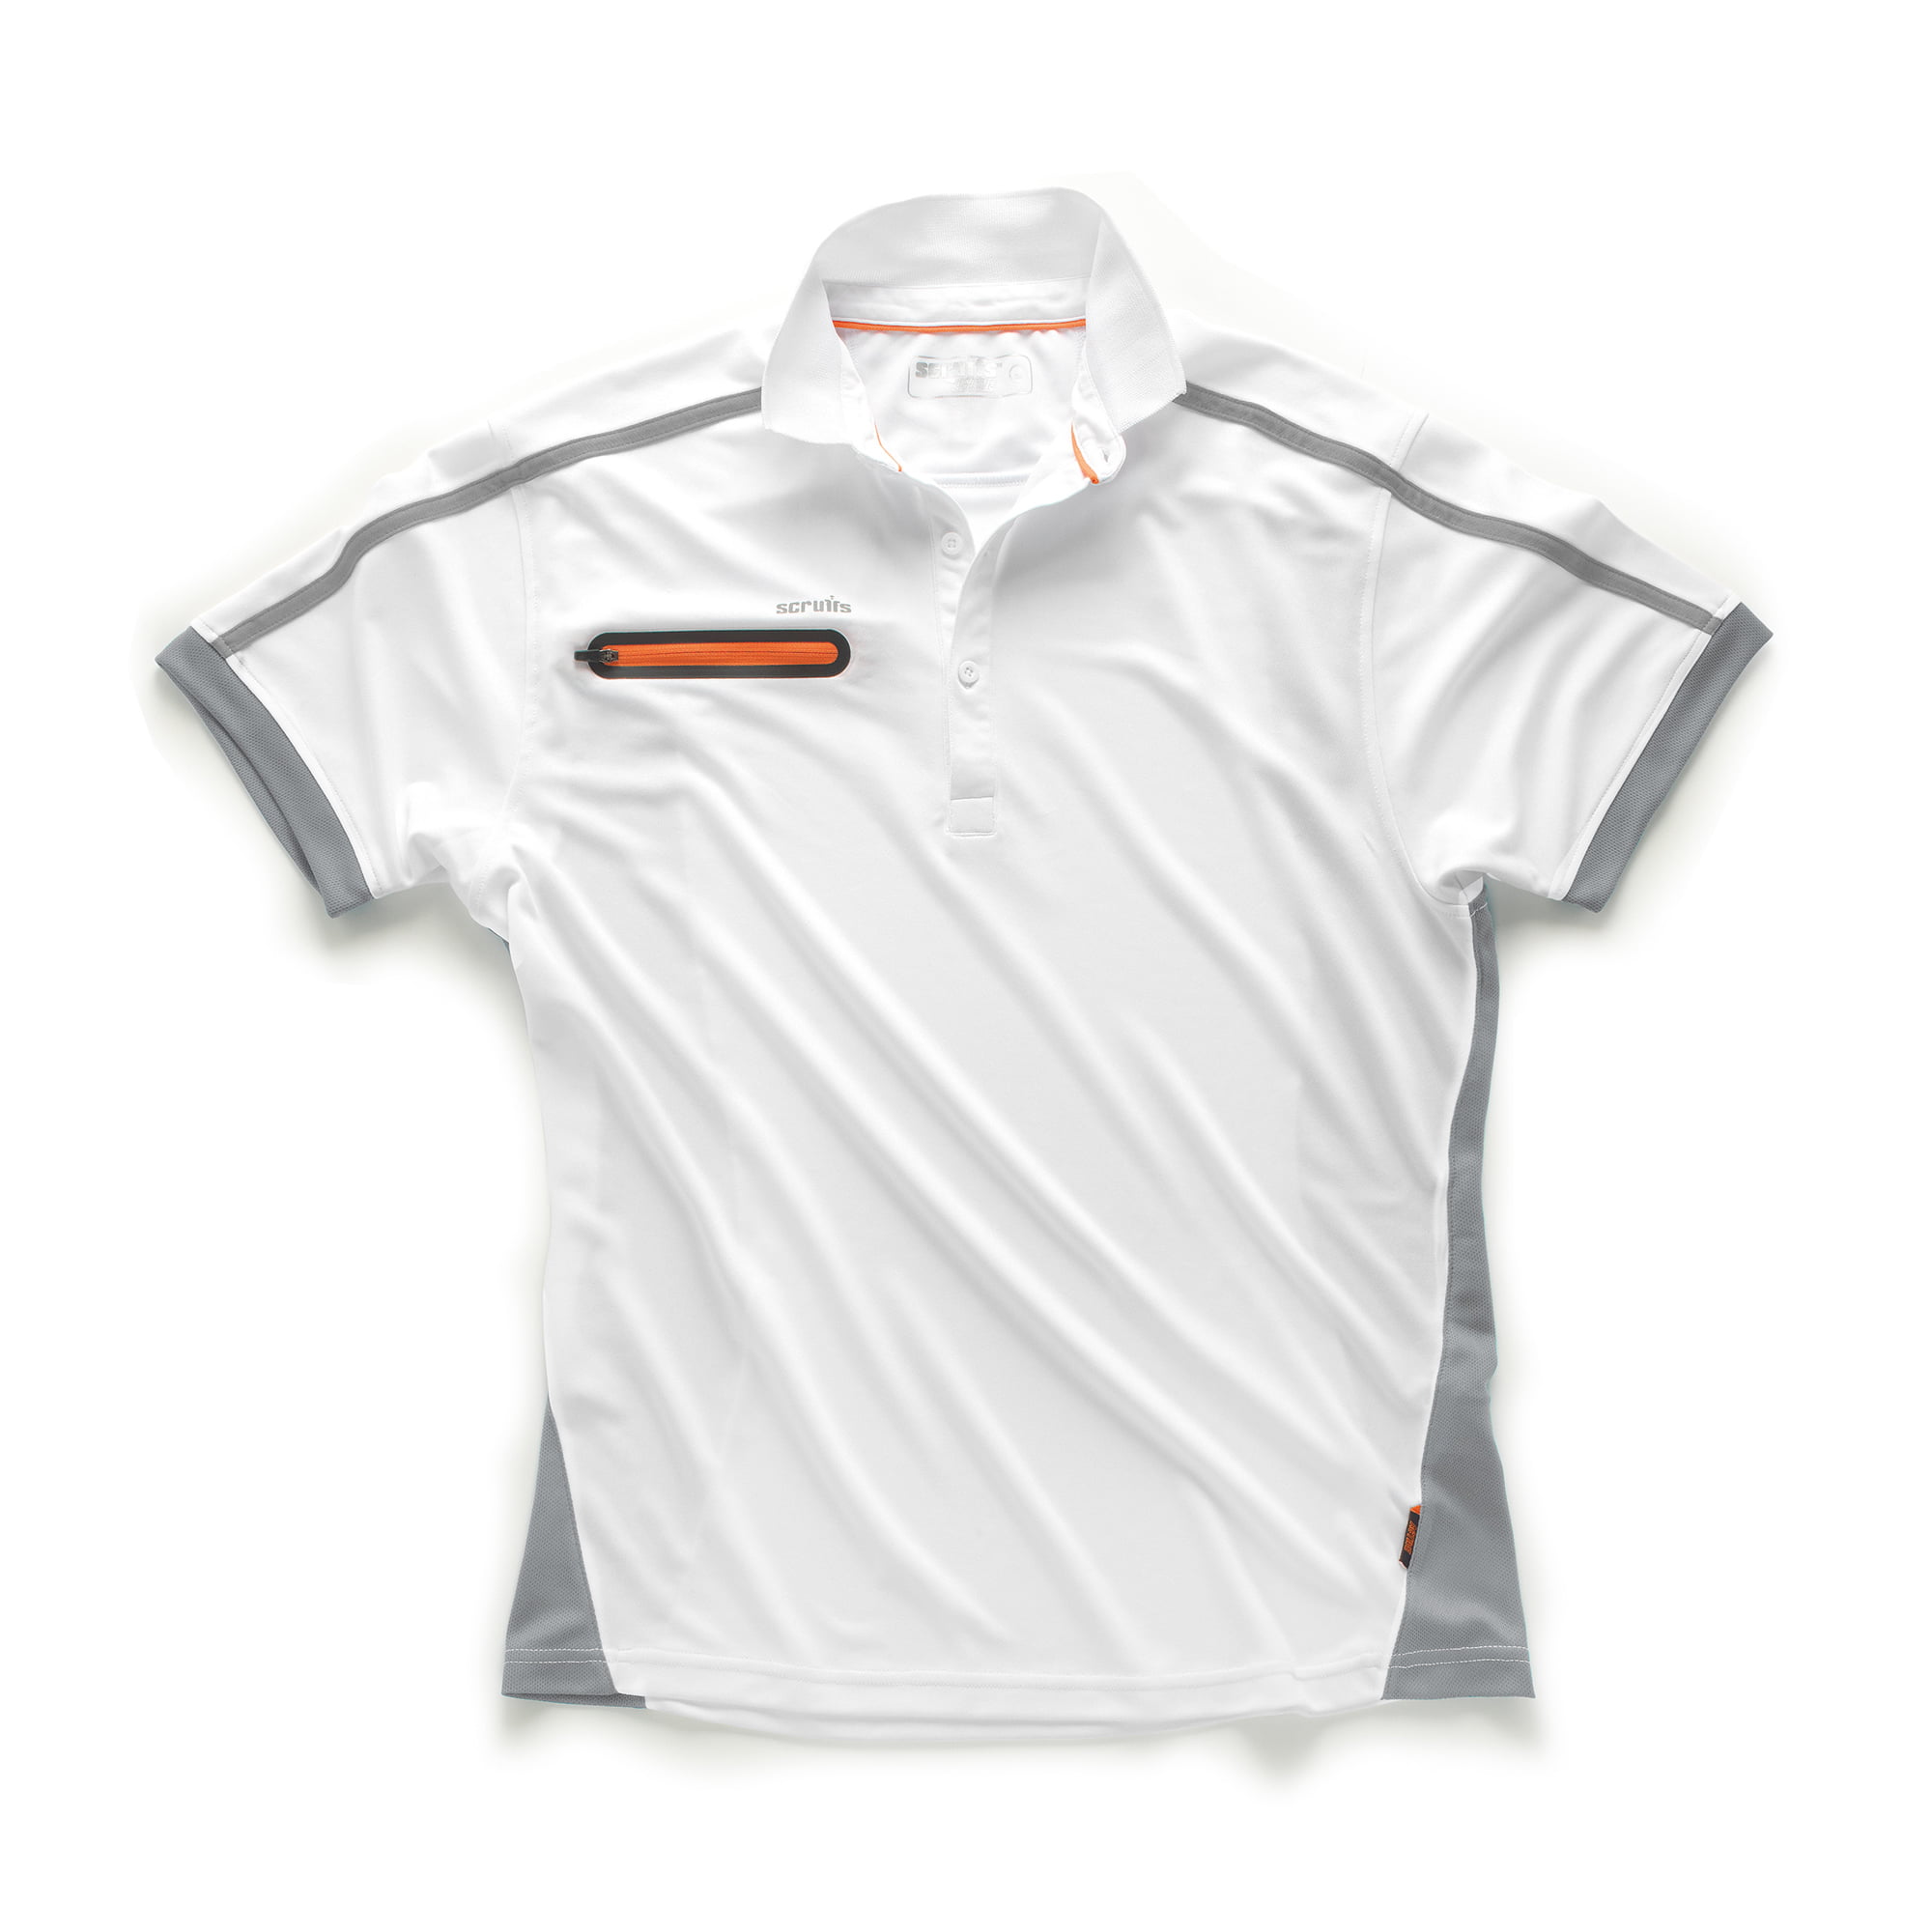 Scruffs white and grey short sleeve polo